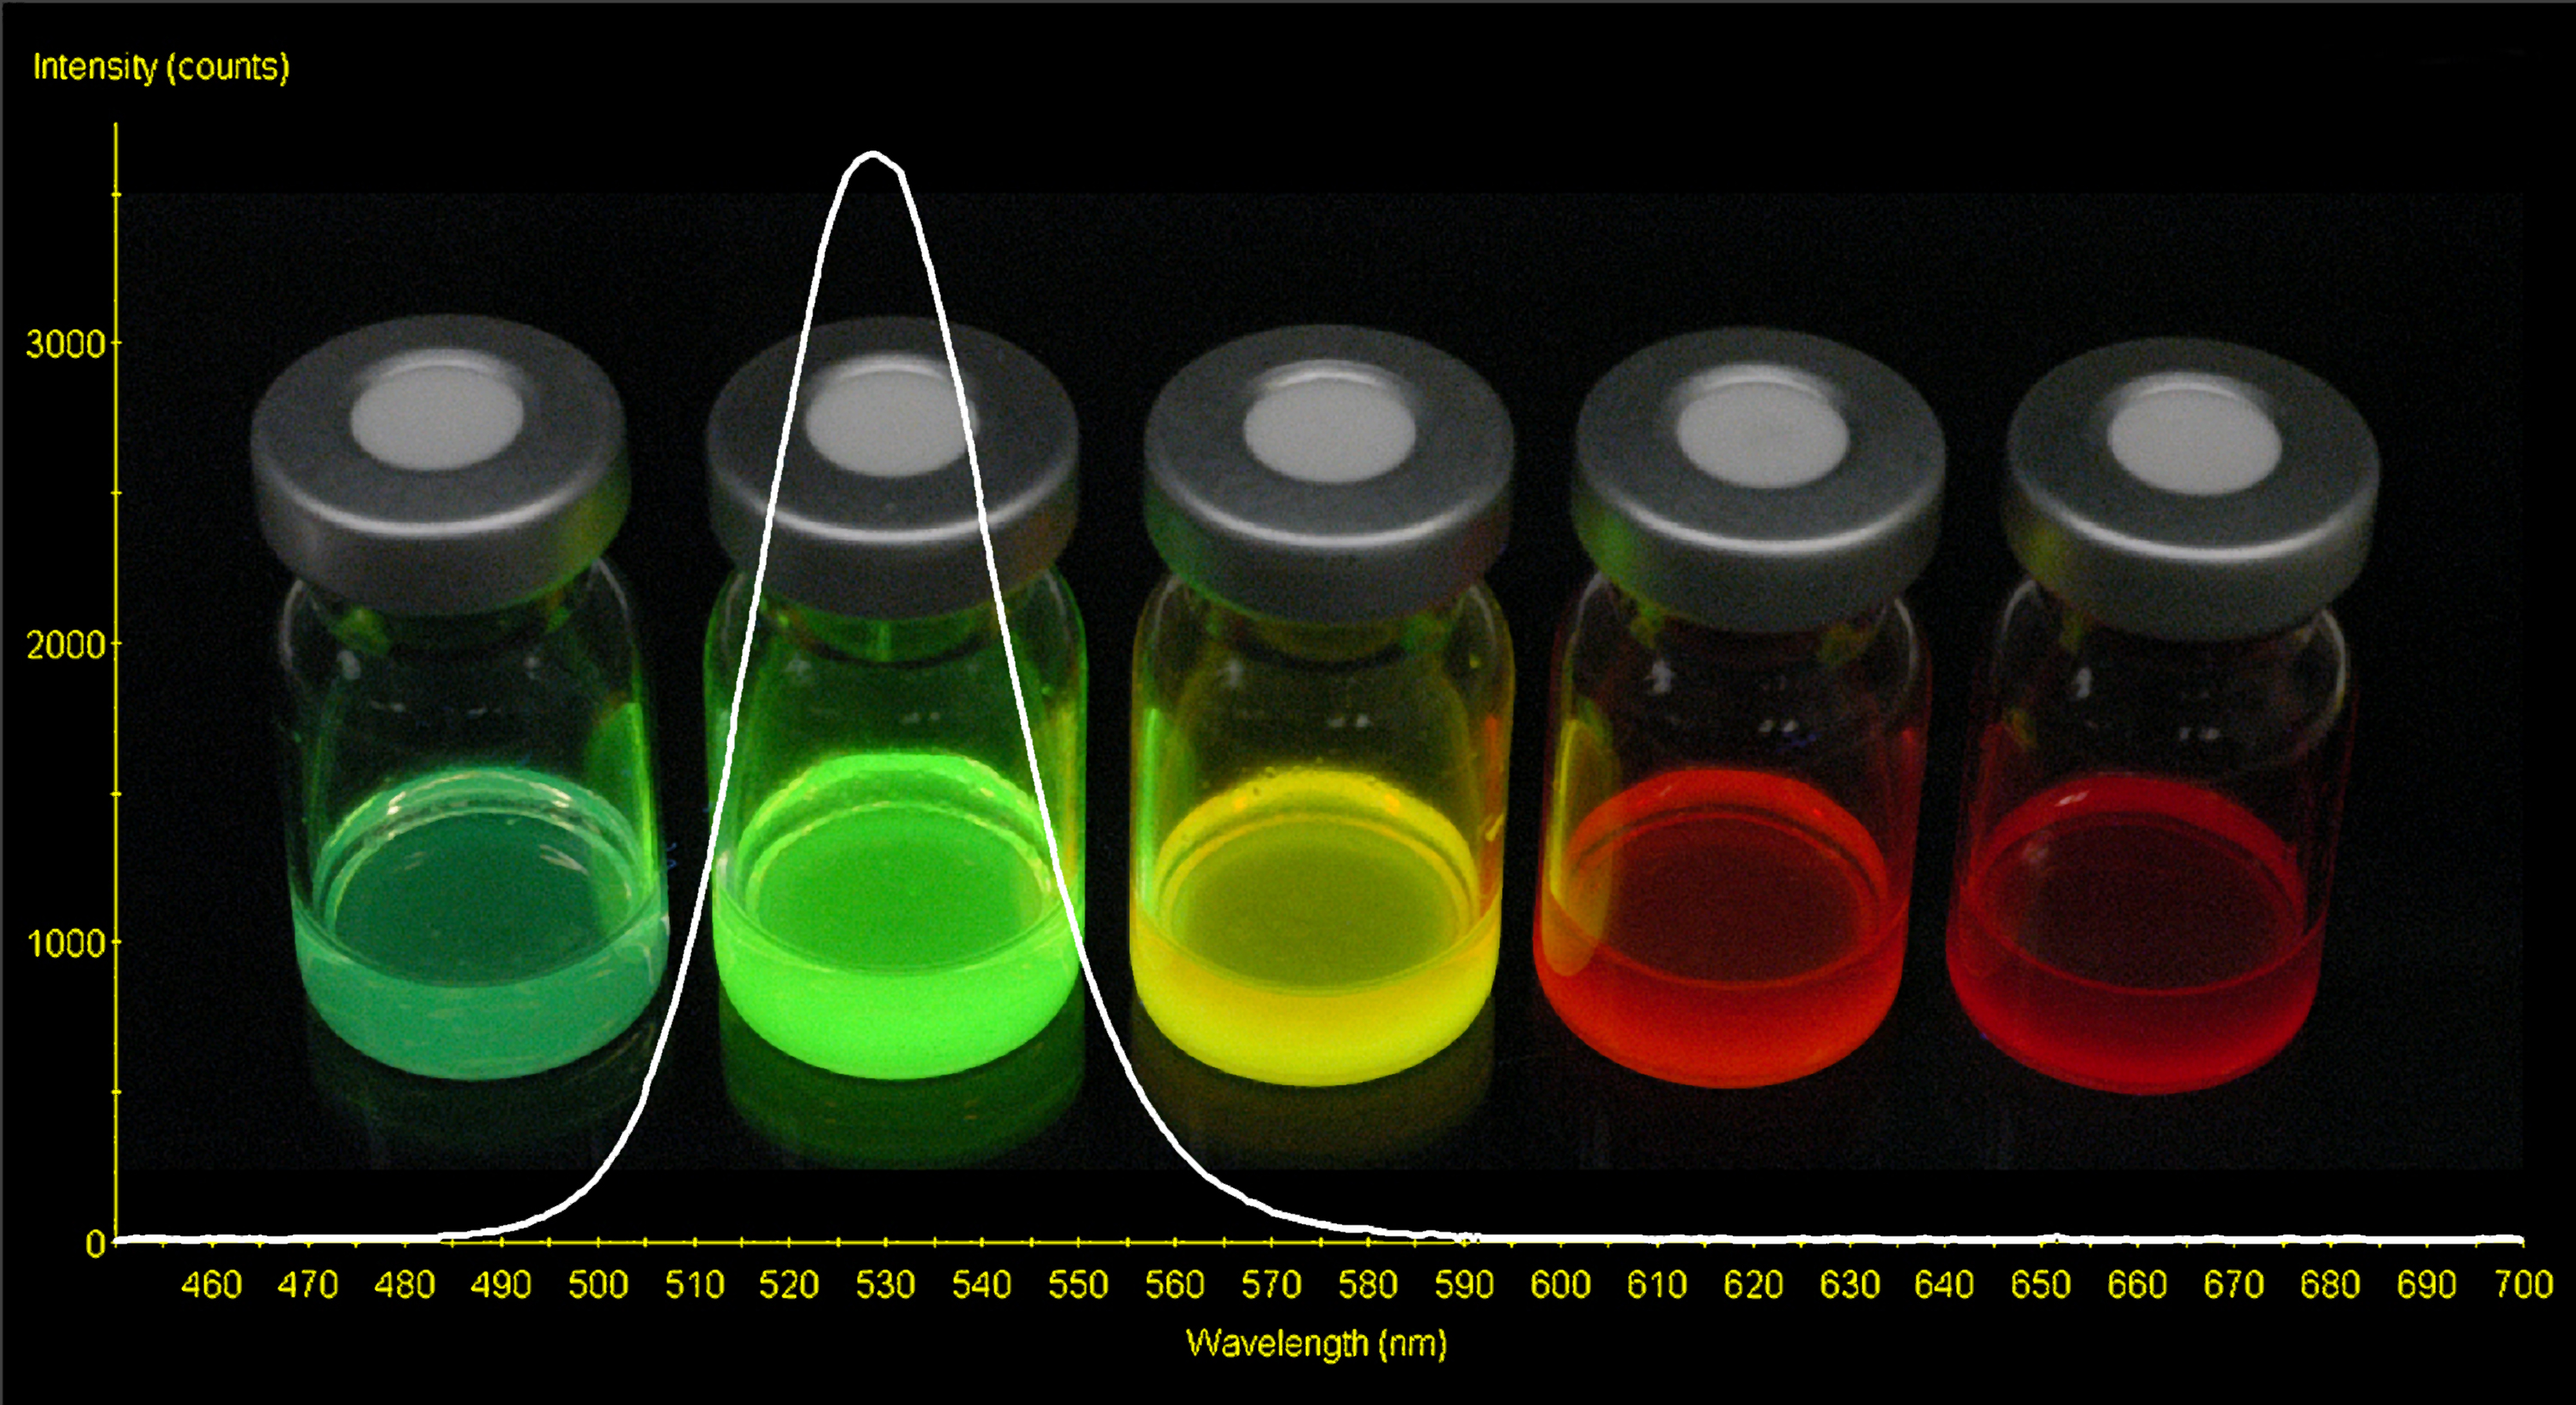 Vials of quantum dots producing vivid colors from violet to deep red